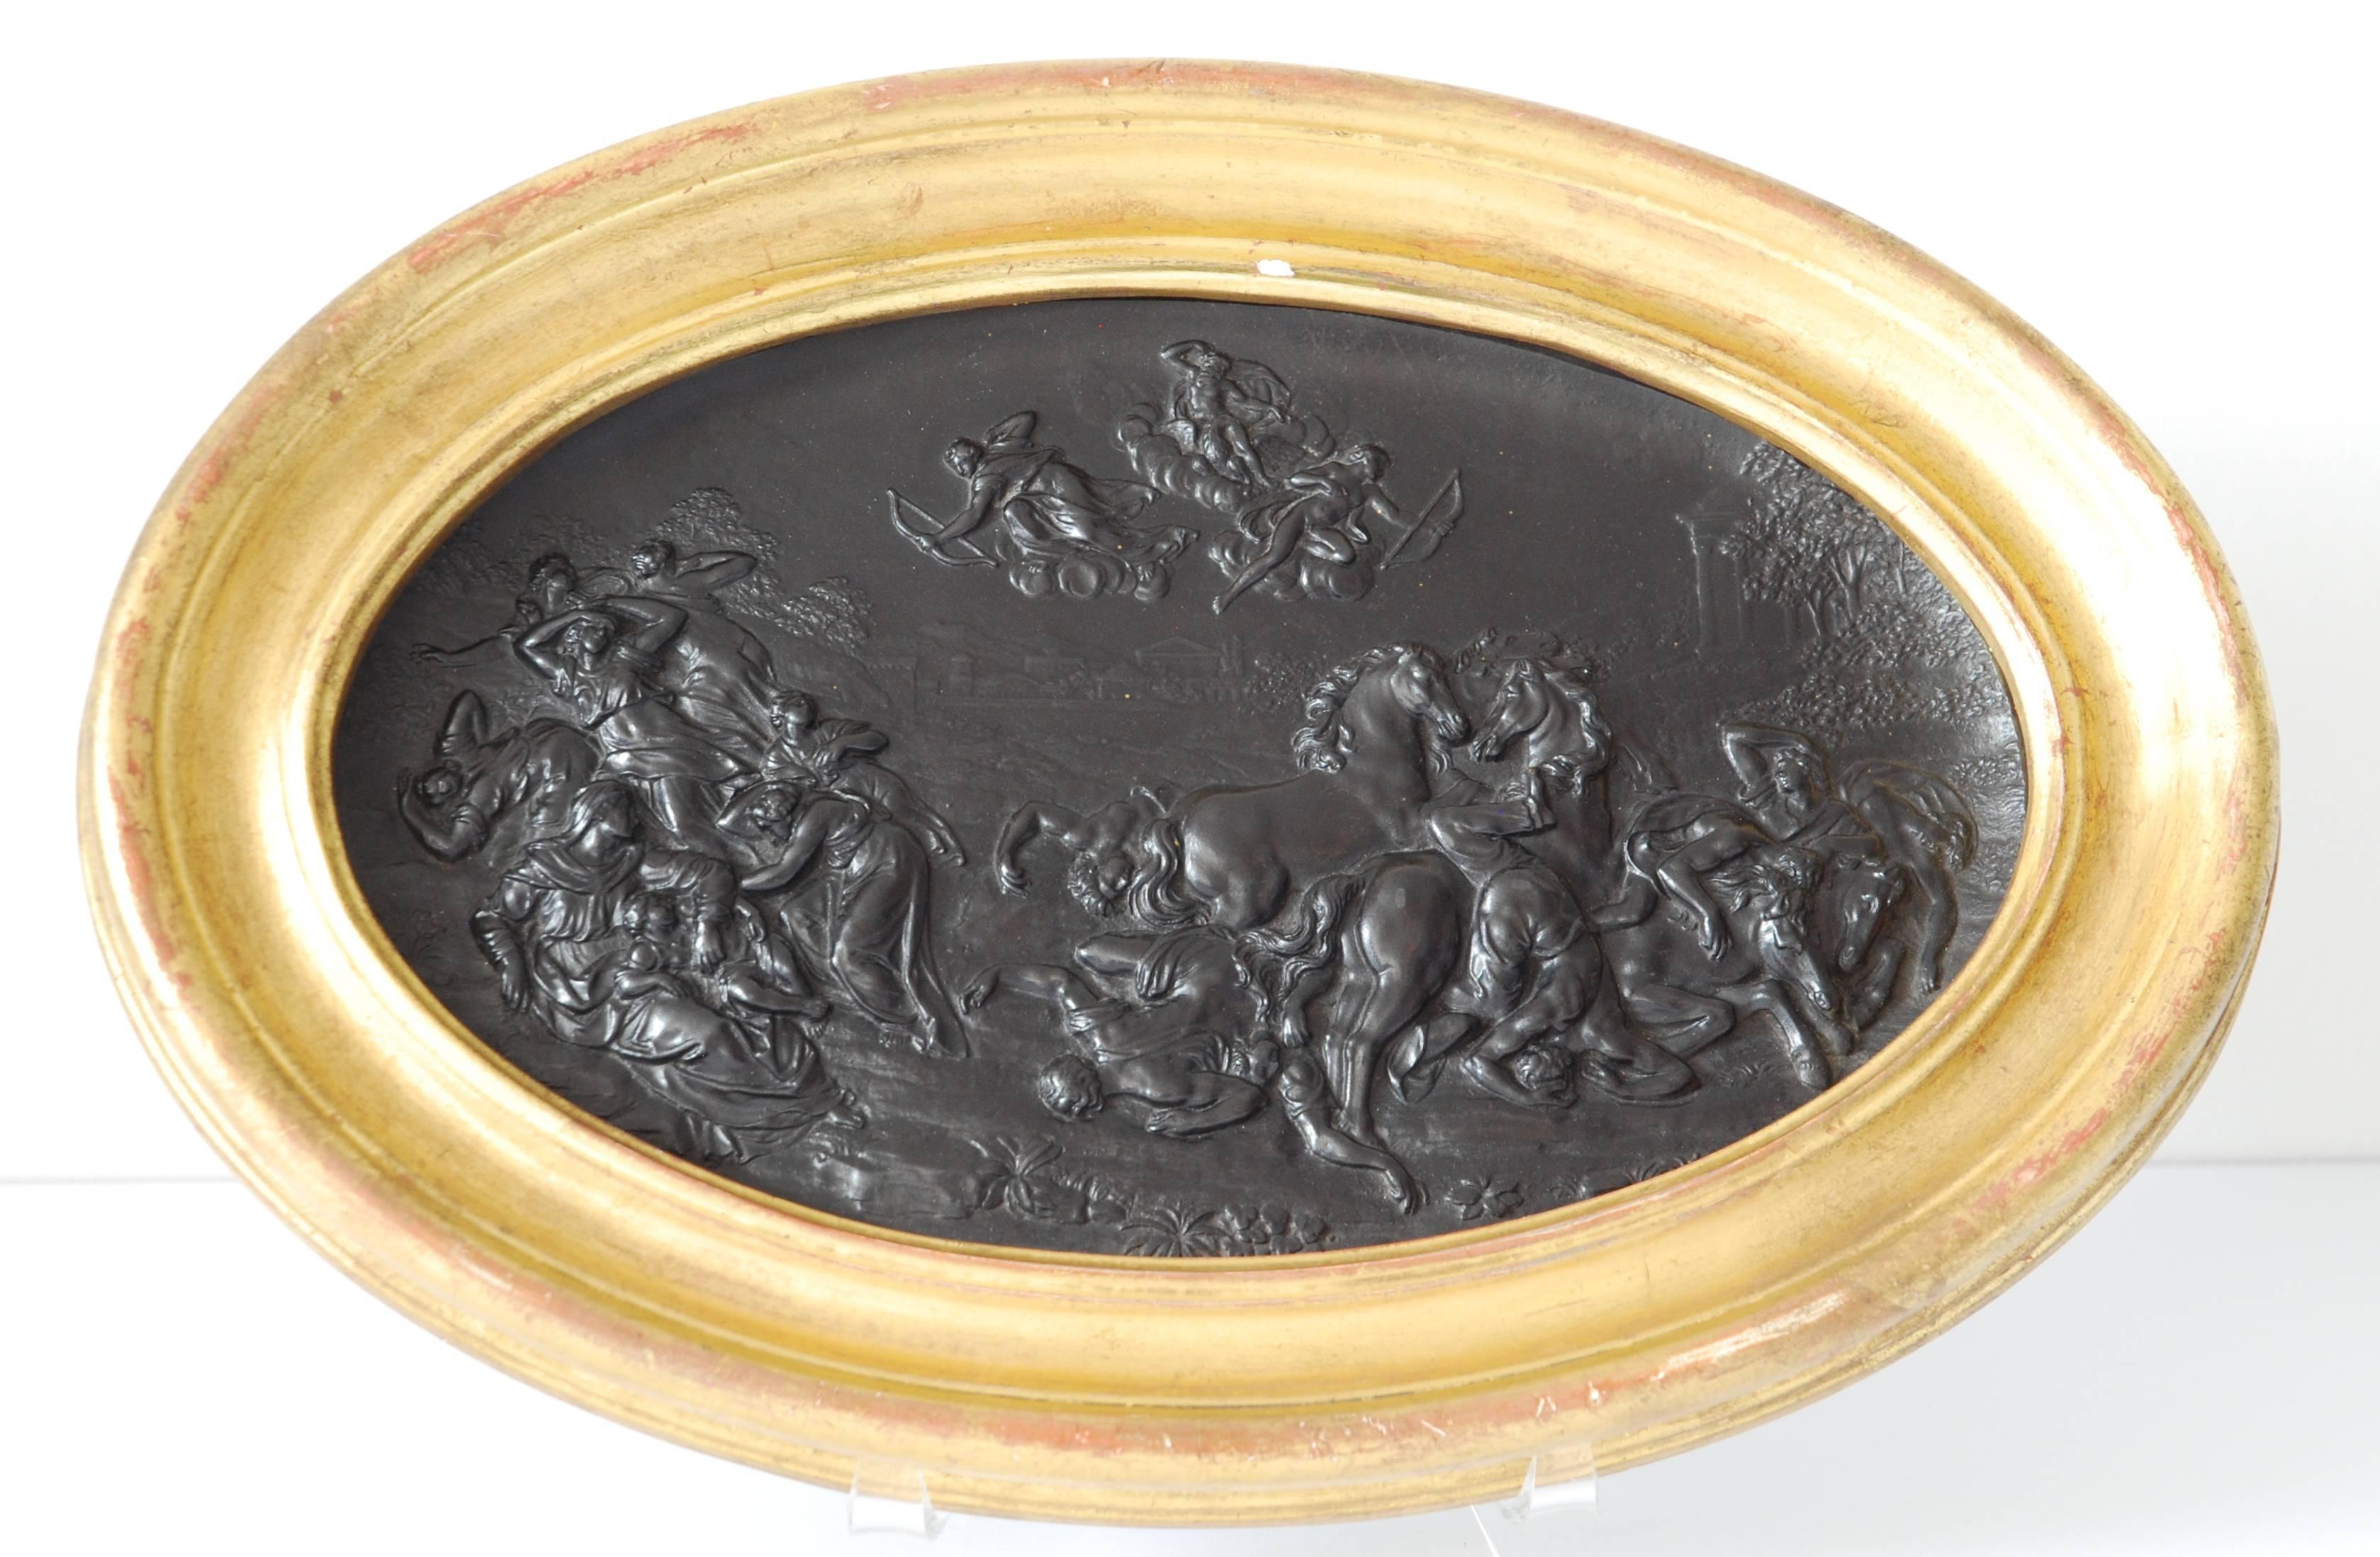 Rare pair of medallions in black basalt, depicting war of the titans and destruction of Niobe’s Children. Adapted from reliefs by Guglielmo della Porta. Original frames.

Unmarked.